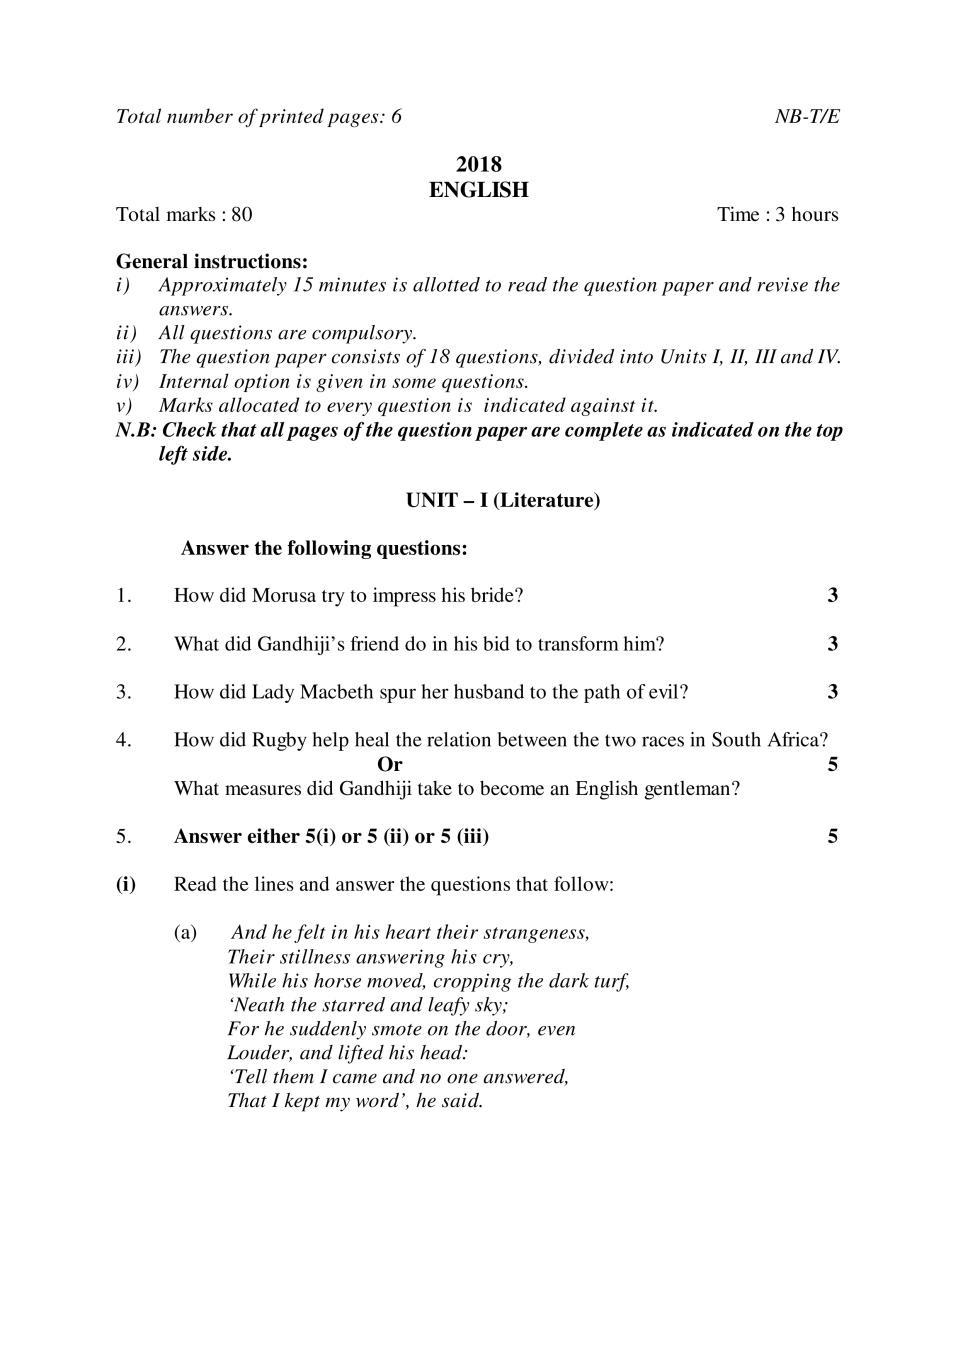 NBSE Class 10 Question Paper 2018 for English - Page 1